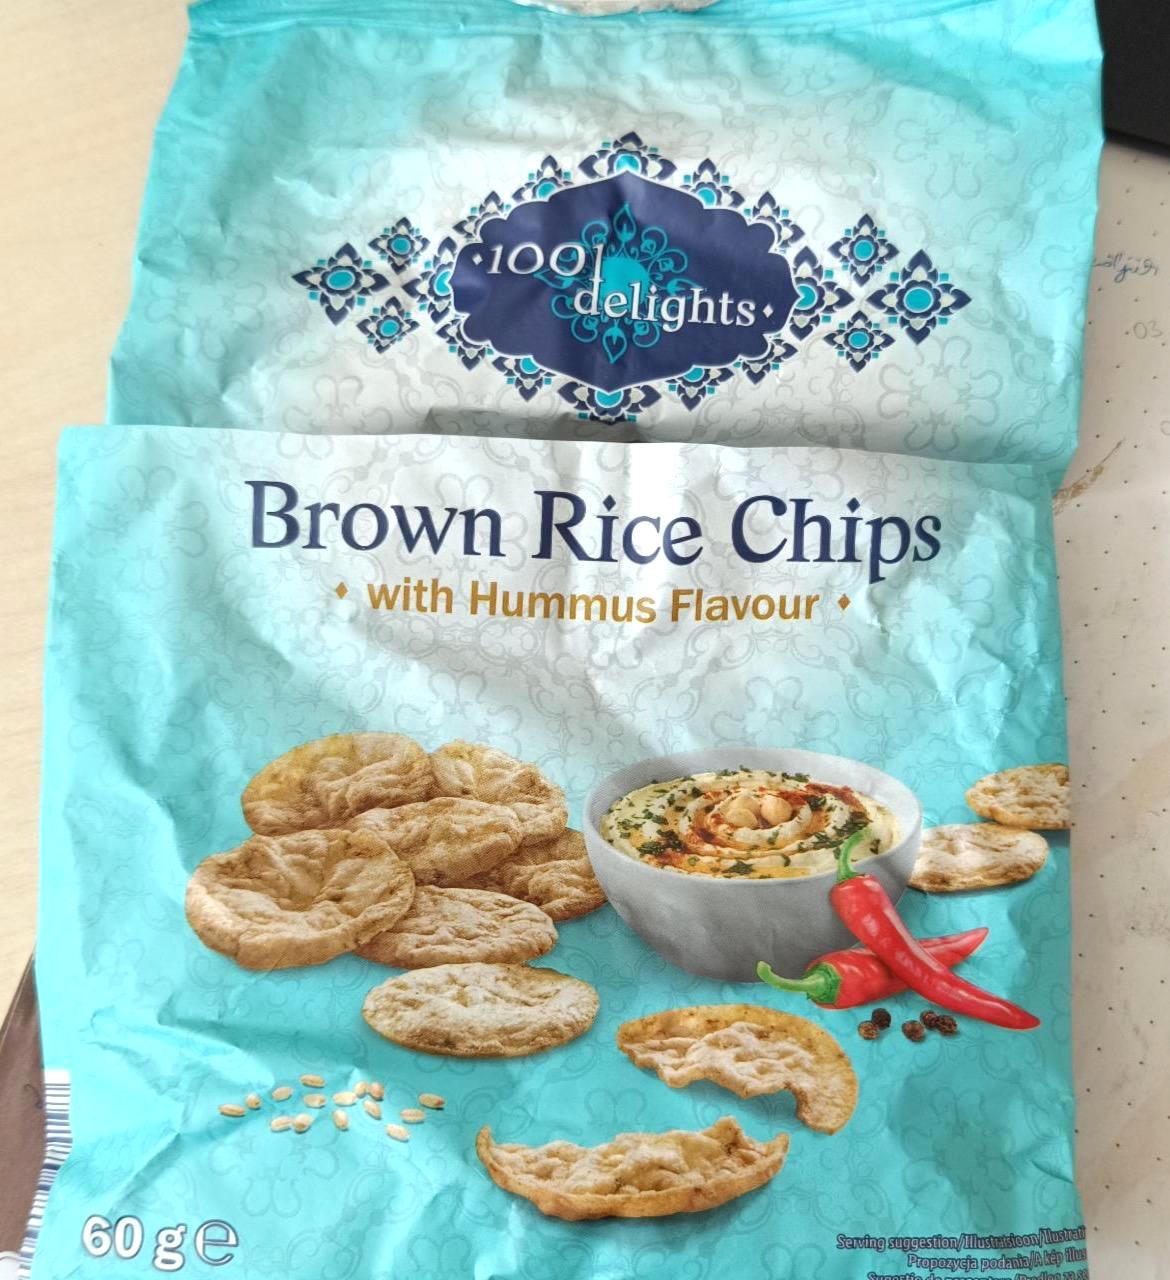 Képek - Brown rice chips with hummus flavour 1001 delights